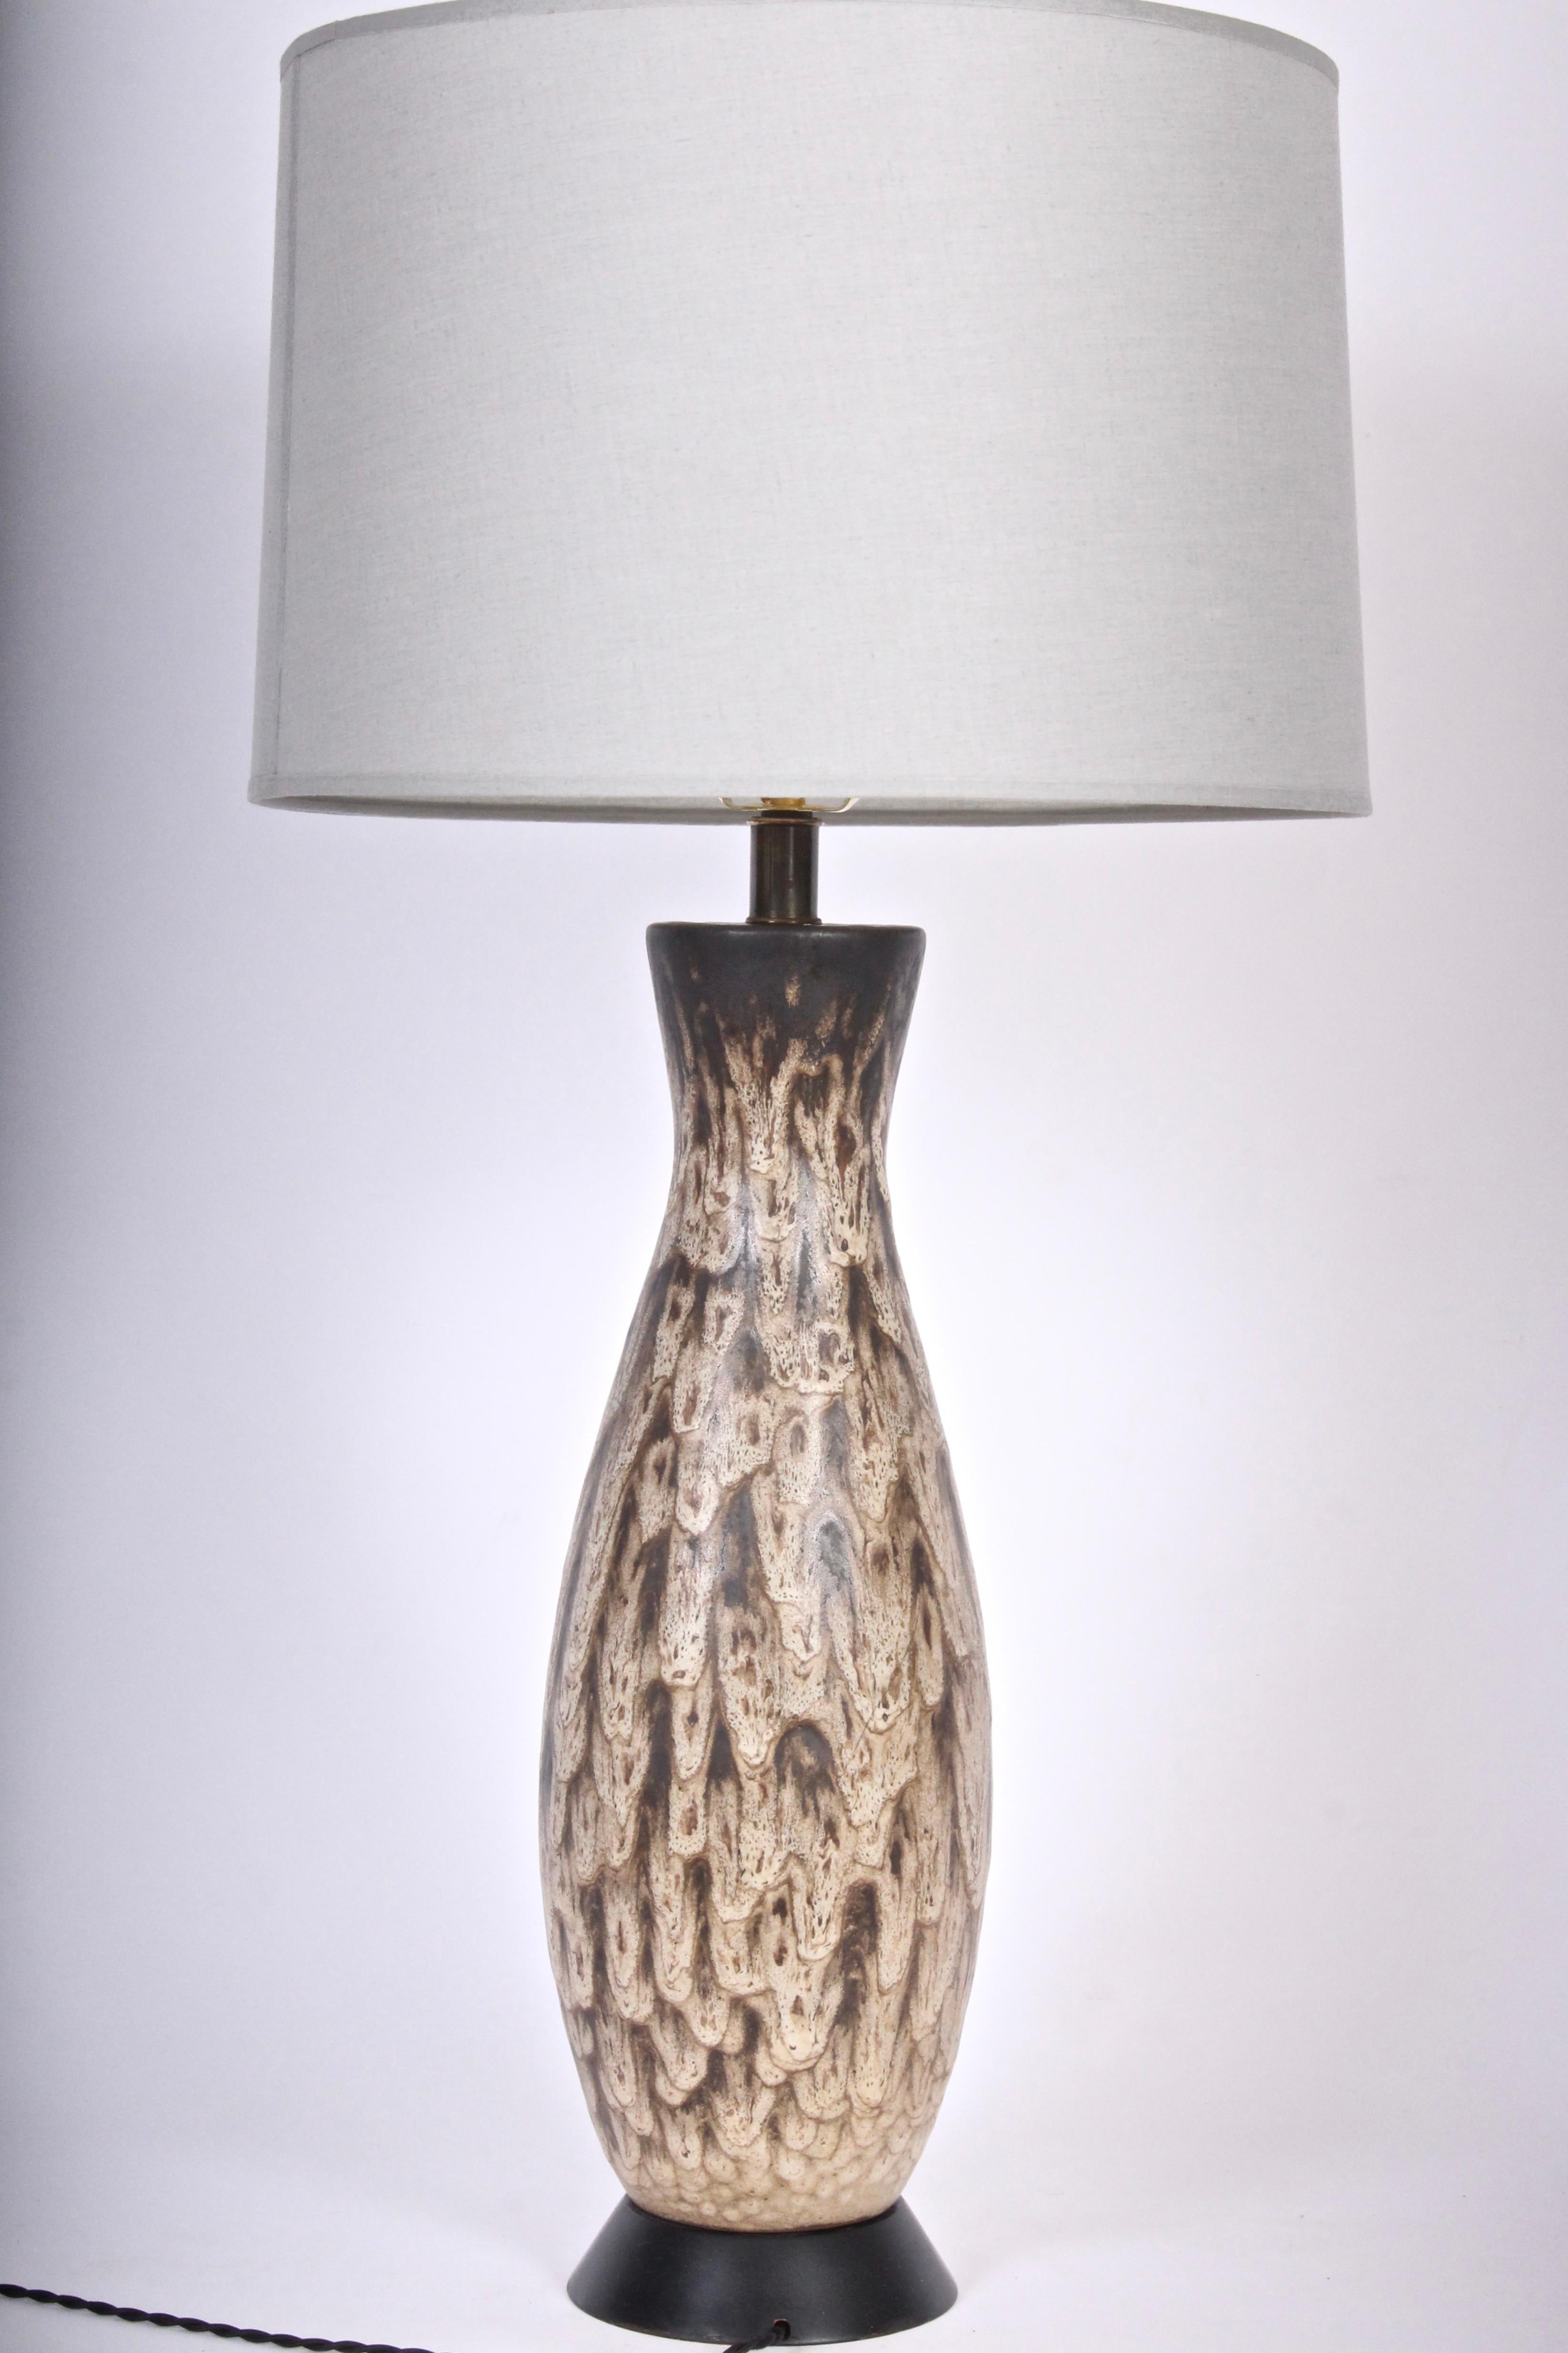 Substantial Lee Rosen for design-technics glazed geologic art pottery table lamp. Small footprint.  Classic Design Technics form, handcrafted with sculptured drip glaze in neutral tones featuring deep brown coloration to top, Taupe, Coffee and